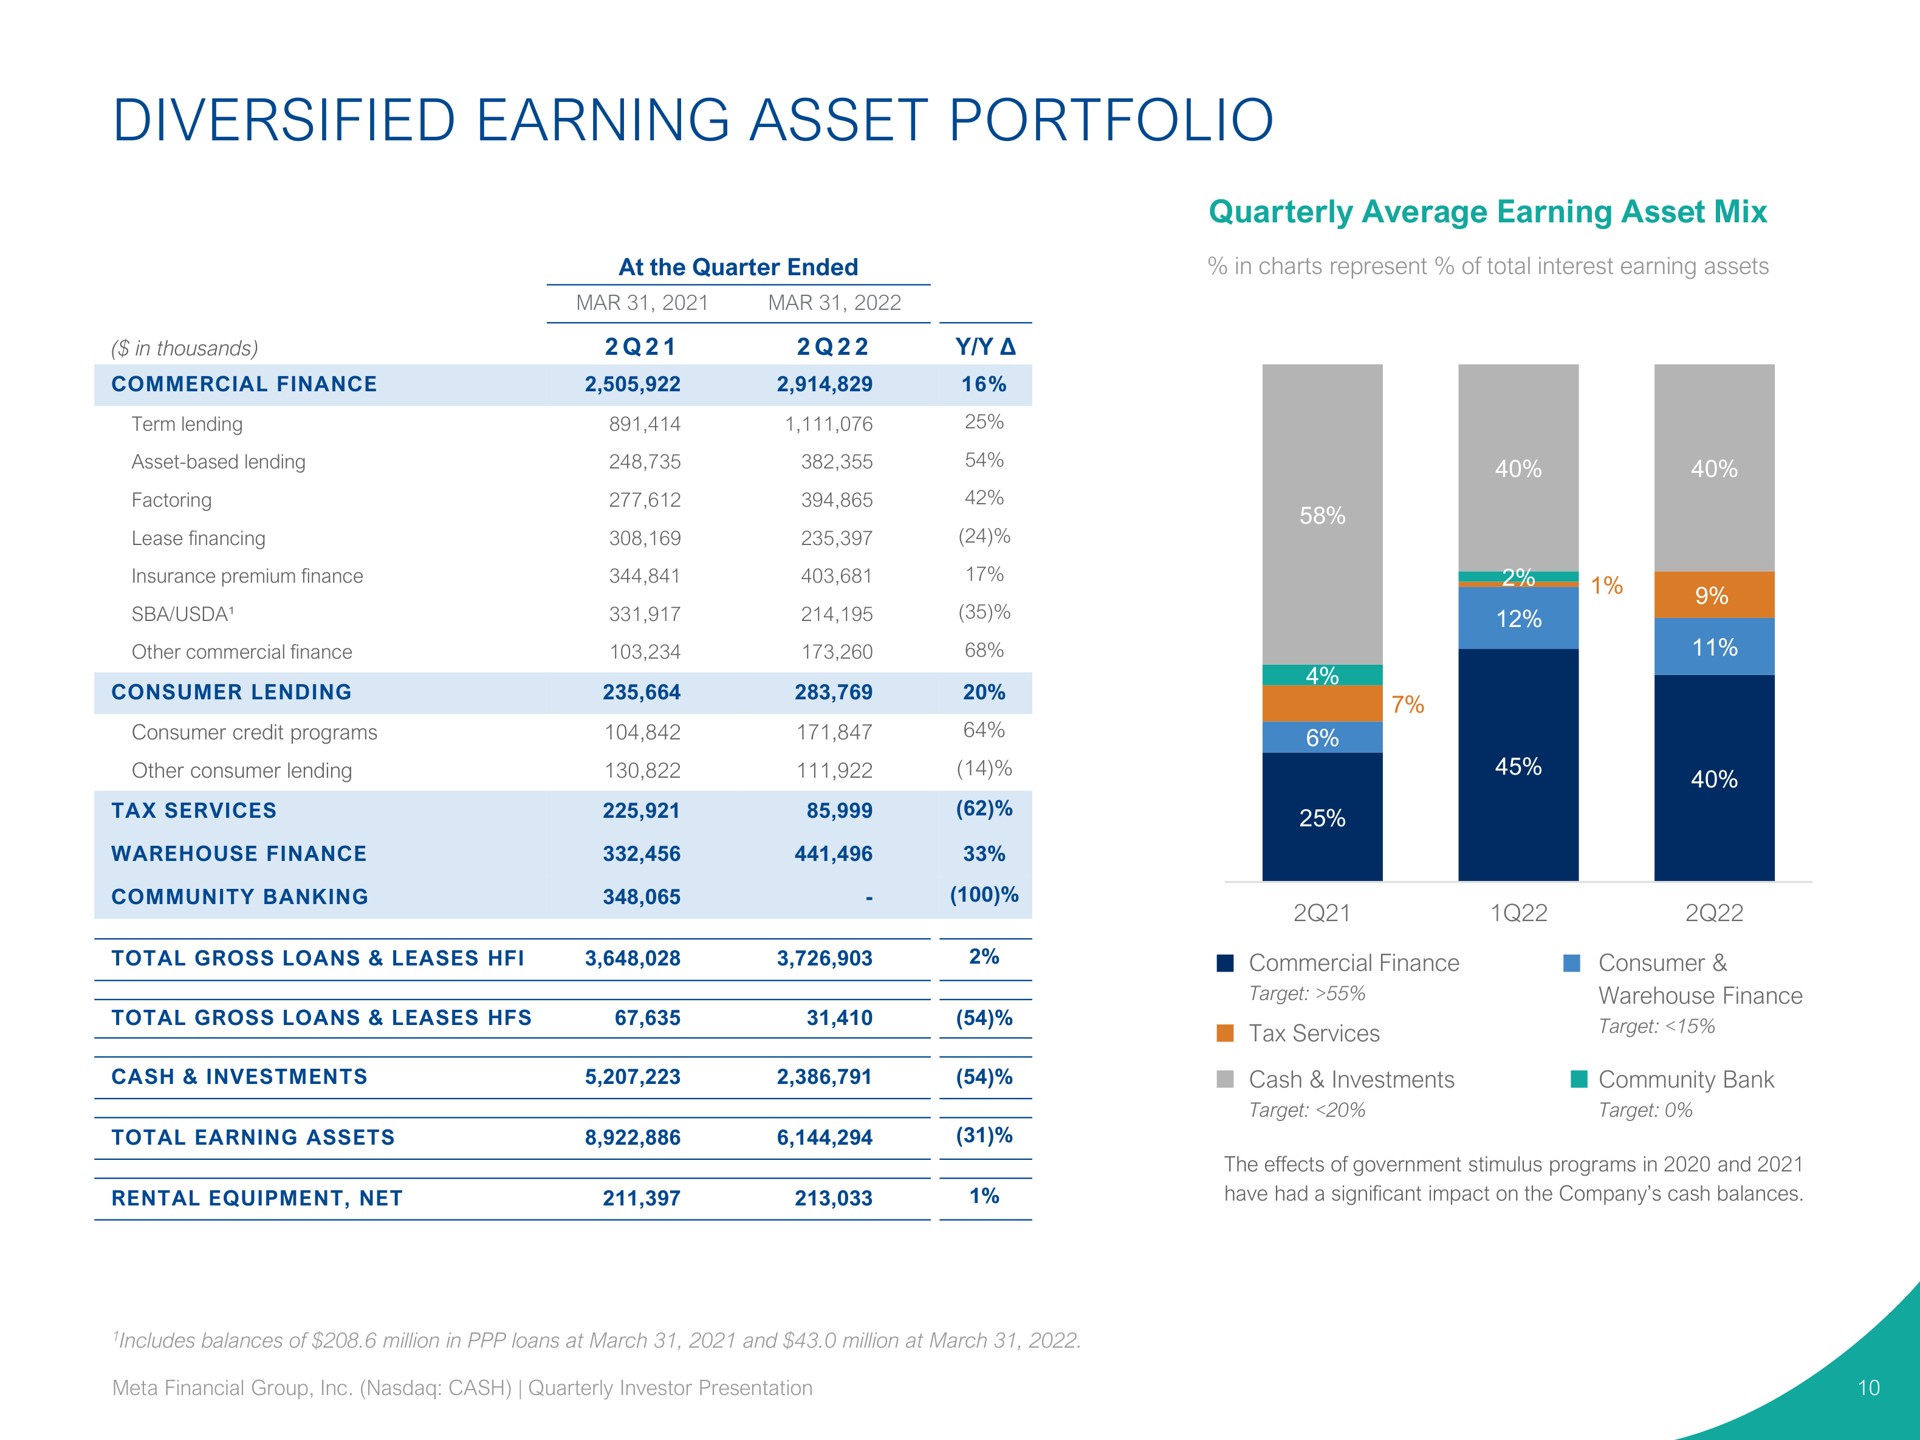 diversified earning asset portfolio leases ies and i tax services target | Pathward Financial